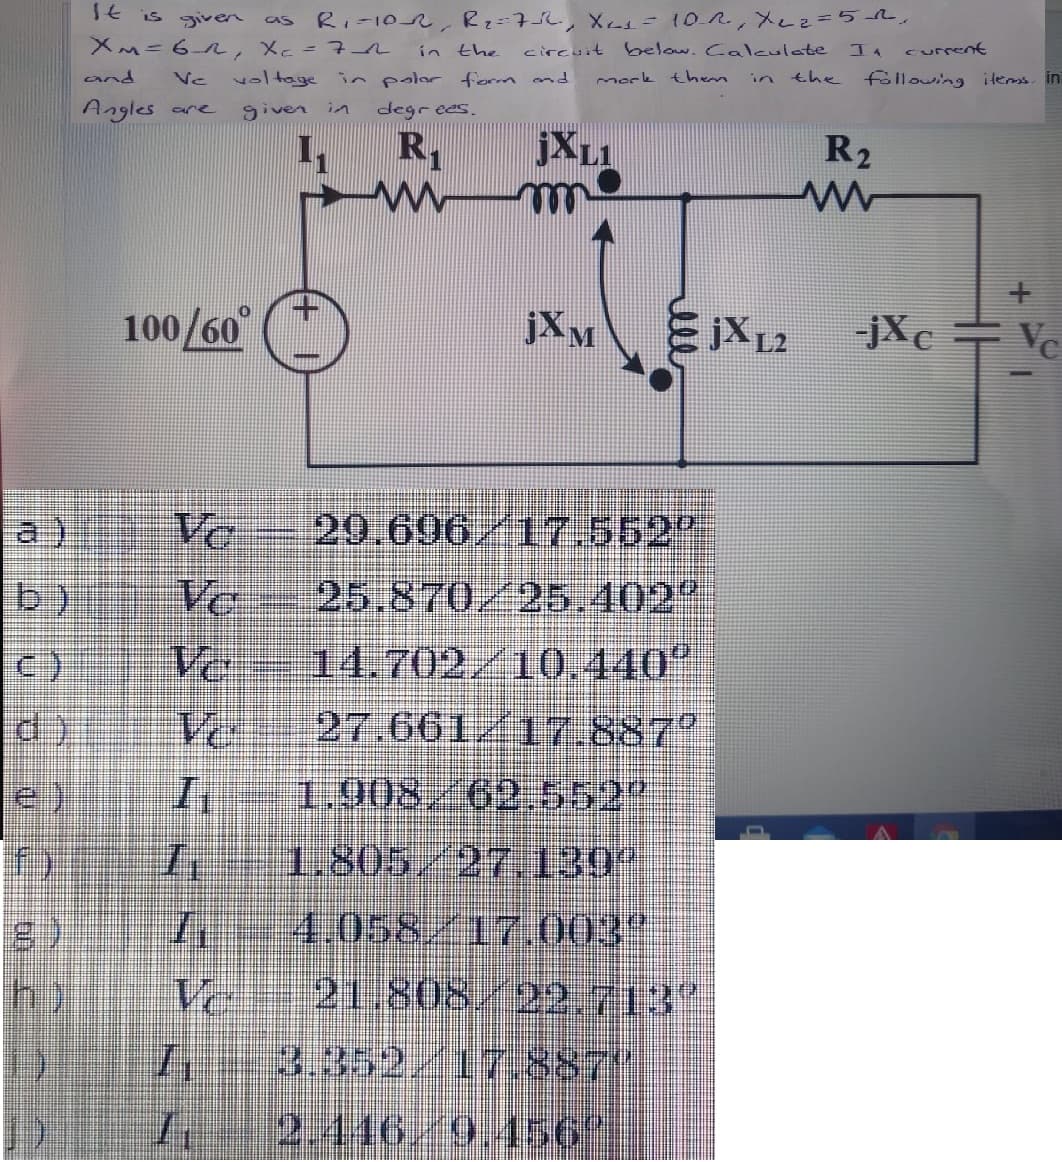 TE is given as
RI-102, Rz=7L, Xes= 10R, Xez=52.
XM=6R, Xc=71
in the
circuit below. Calculate
I. curment
and
Ve
voltage in polar form and
mork then
the
following ilems. in
in
Angles are
given in
degr ees.
I,
JXL1
R2
100/60°
jXM
-jXc +Vc
a)
Vo
29.696/17.552
b)
Ve
25.870/25.402
Ve
14.702/10.440"
d)
Vo
27.661/177.887°
1.908,/62 552"
1.805/27,130
4.058/17.003"
21.808/22.713"
h)
Ve
3.352,/17.887"
2.446/9.456
